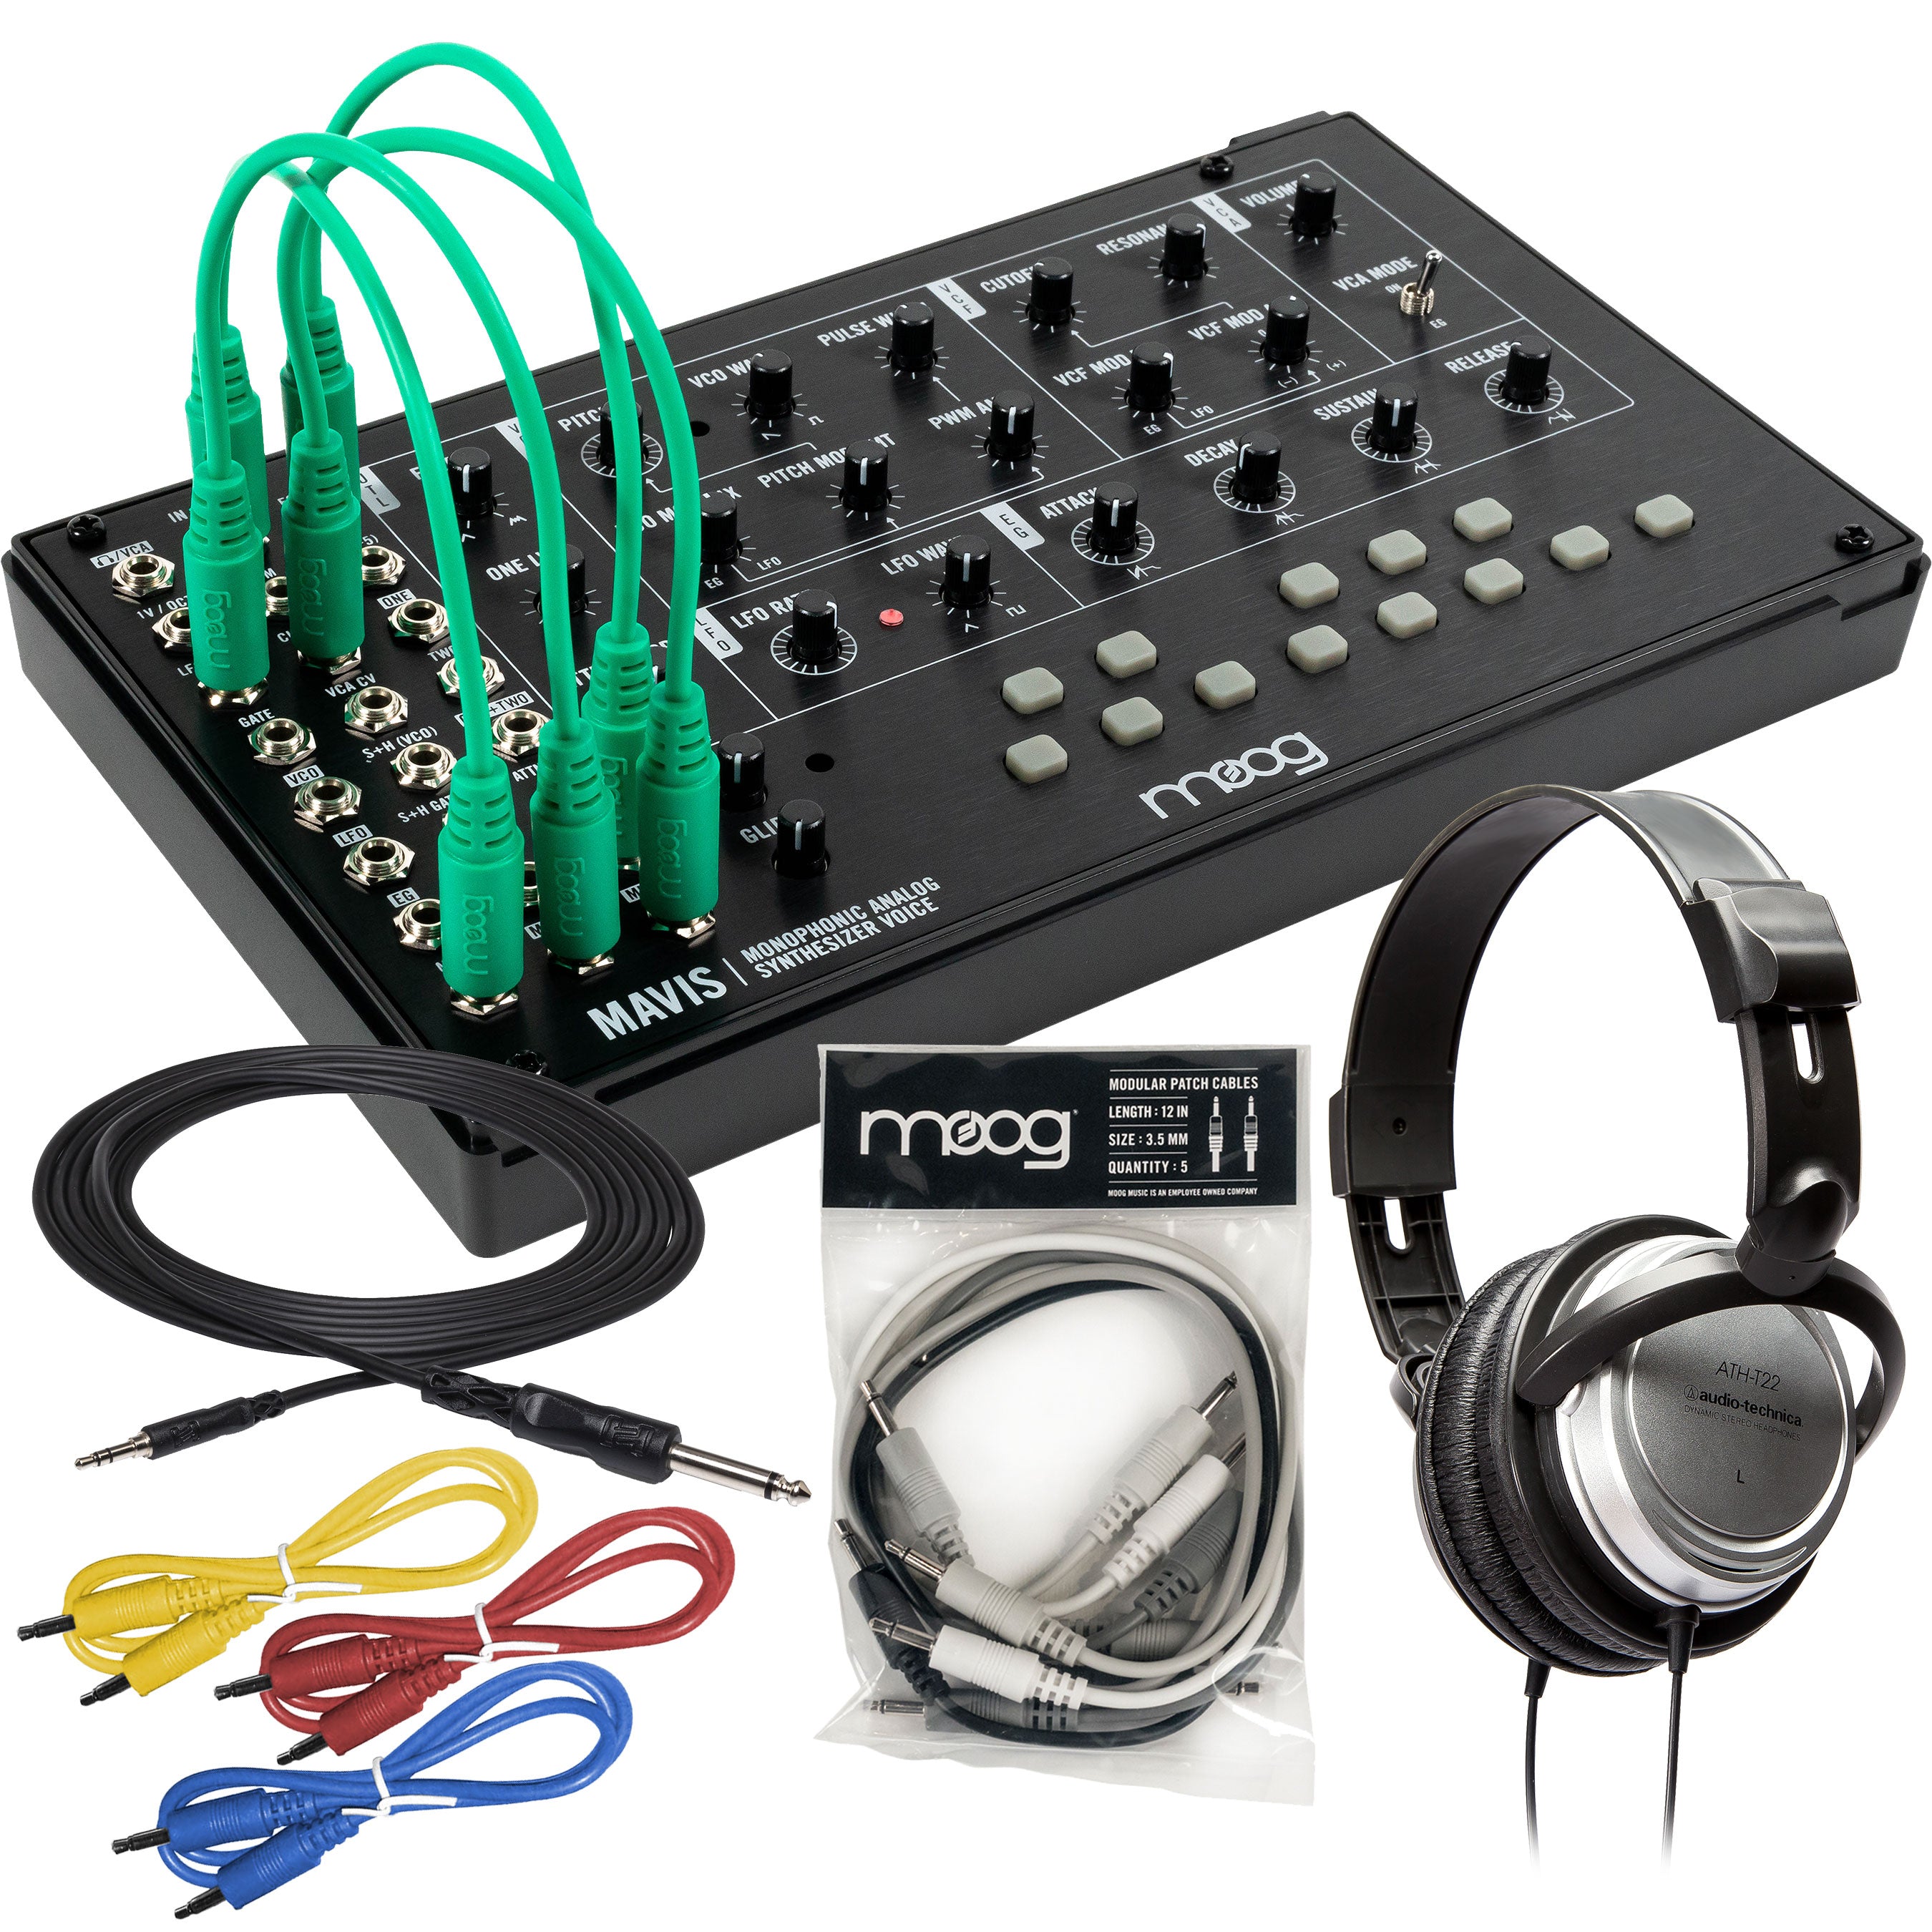 Collage showing components in Moog Mavis Build-it-Yourself Analog Synthesizer STUDIO KIT